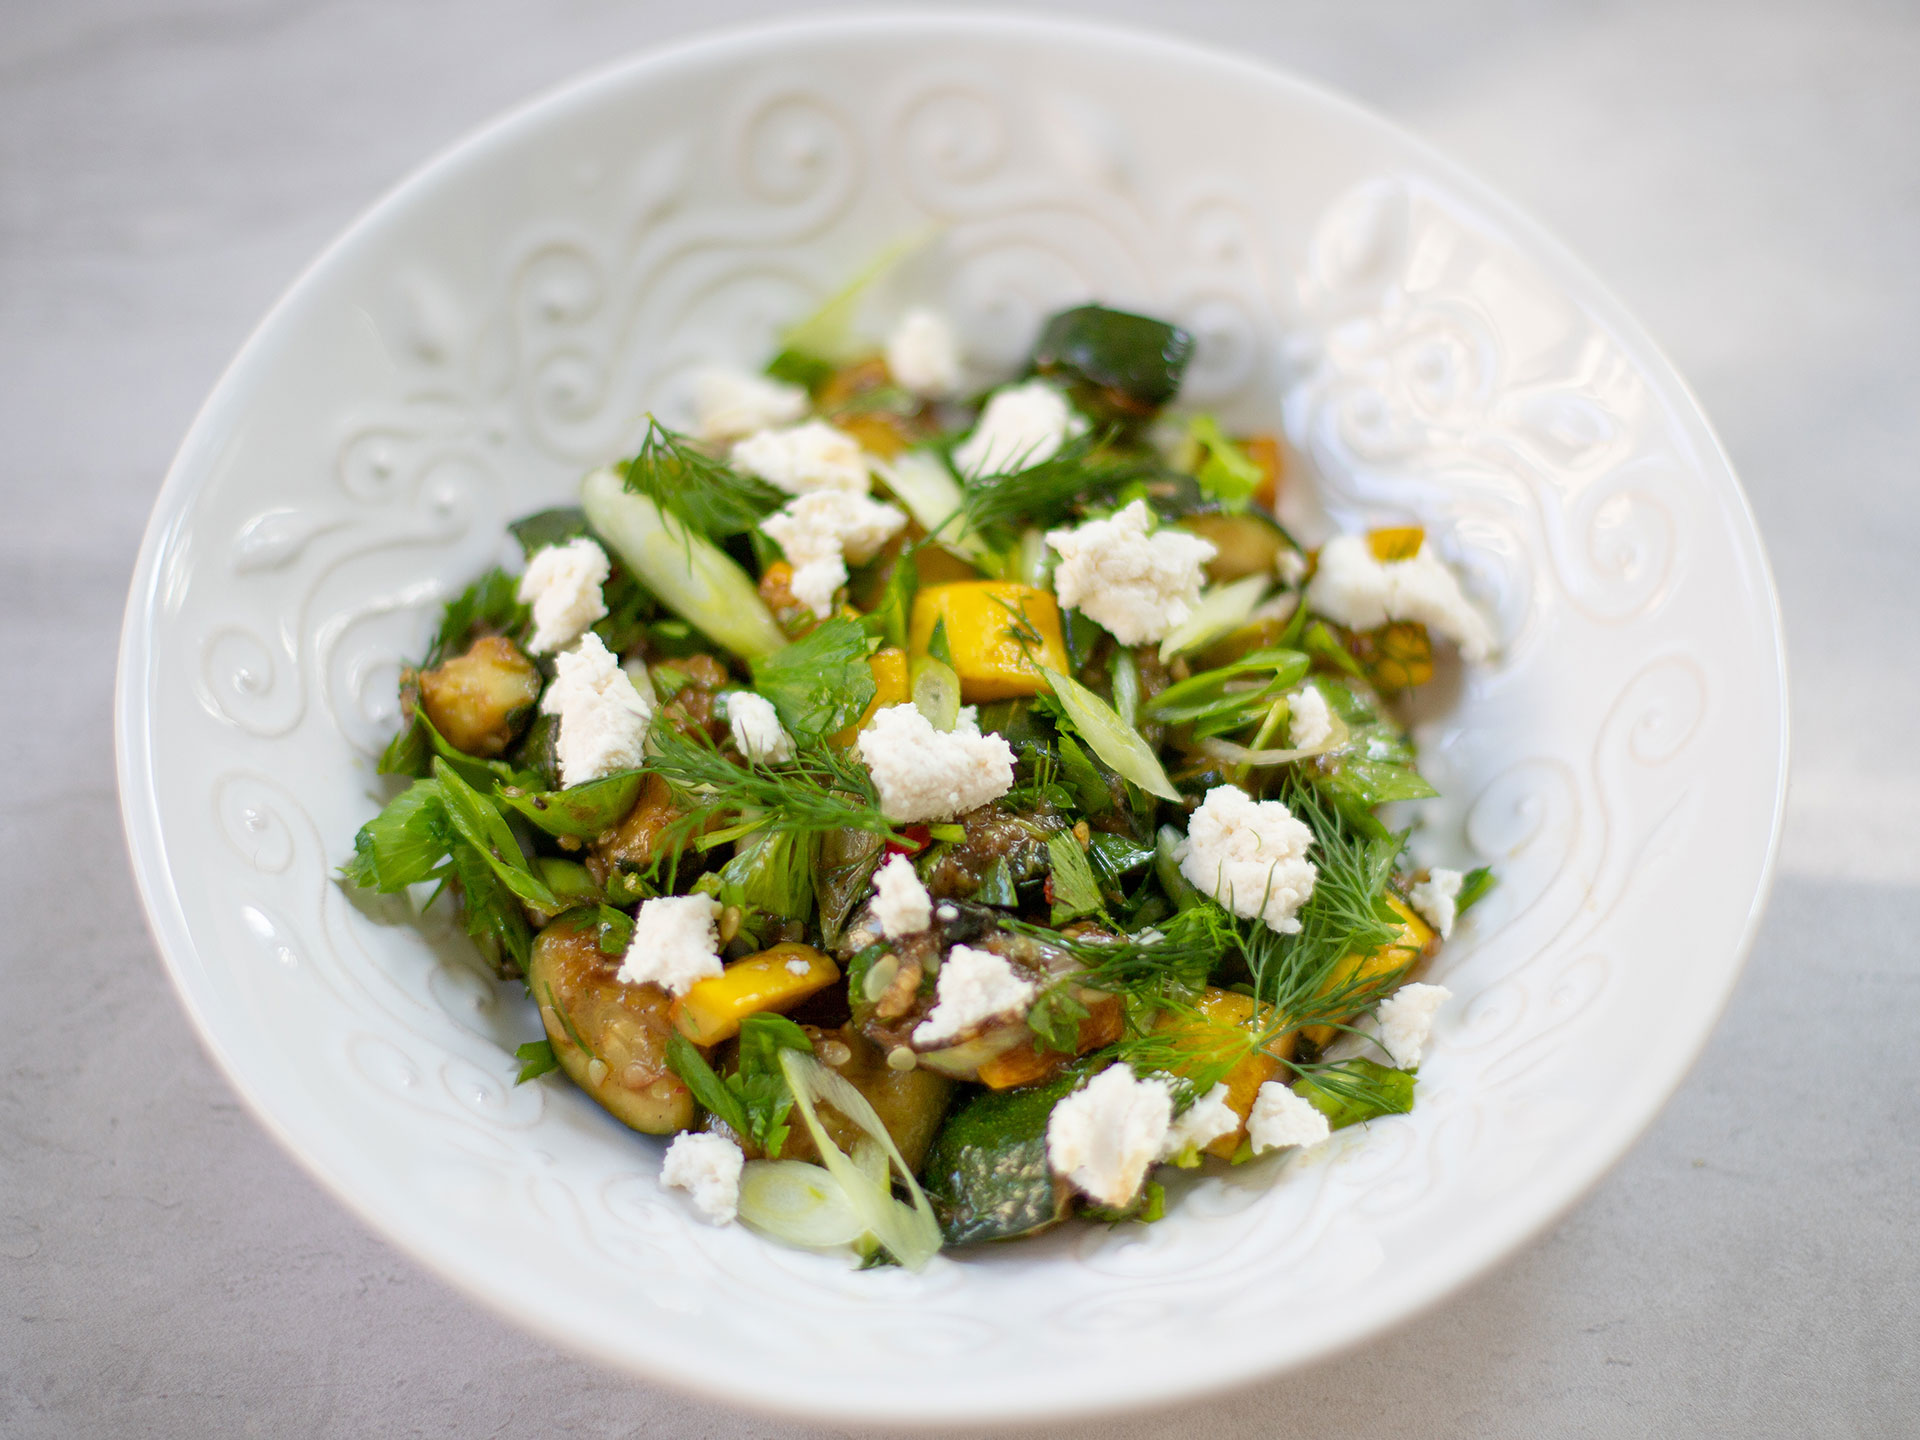 Roasted Zucchini with Celery Leaves, Dill, Balsamic Reduction and Almond Milk Ricotta Recipe